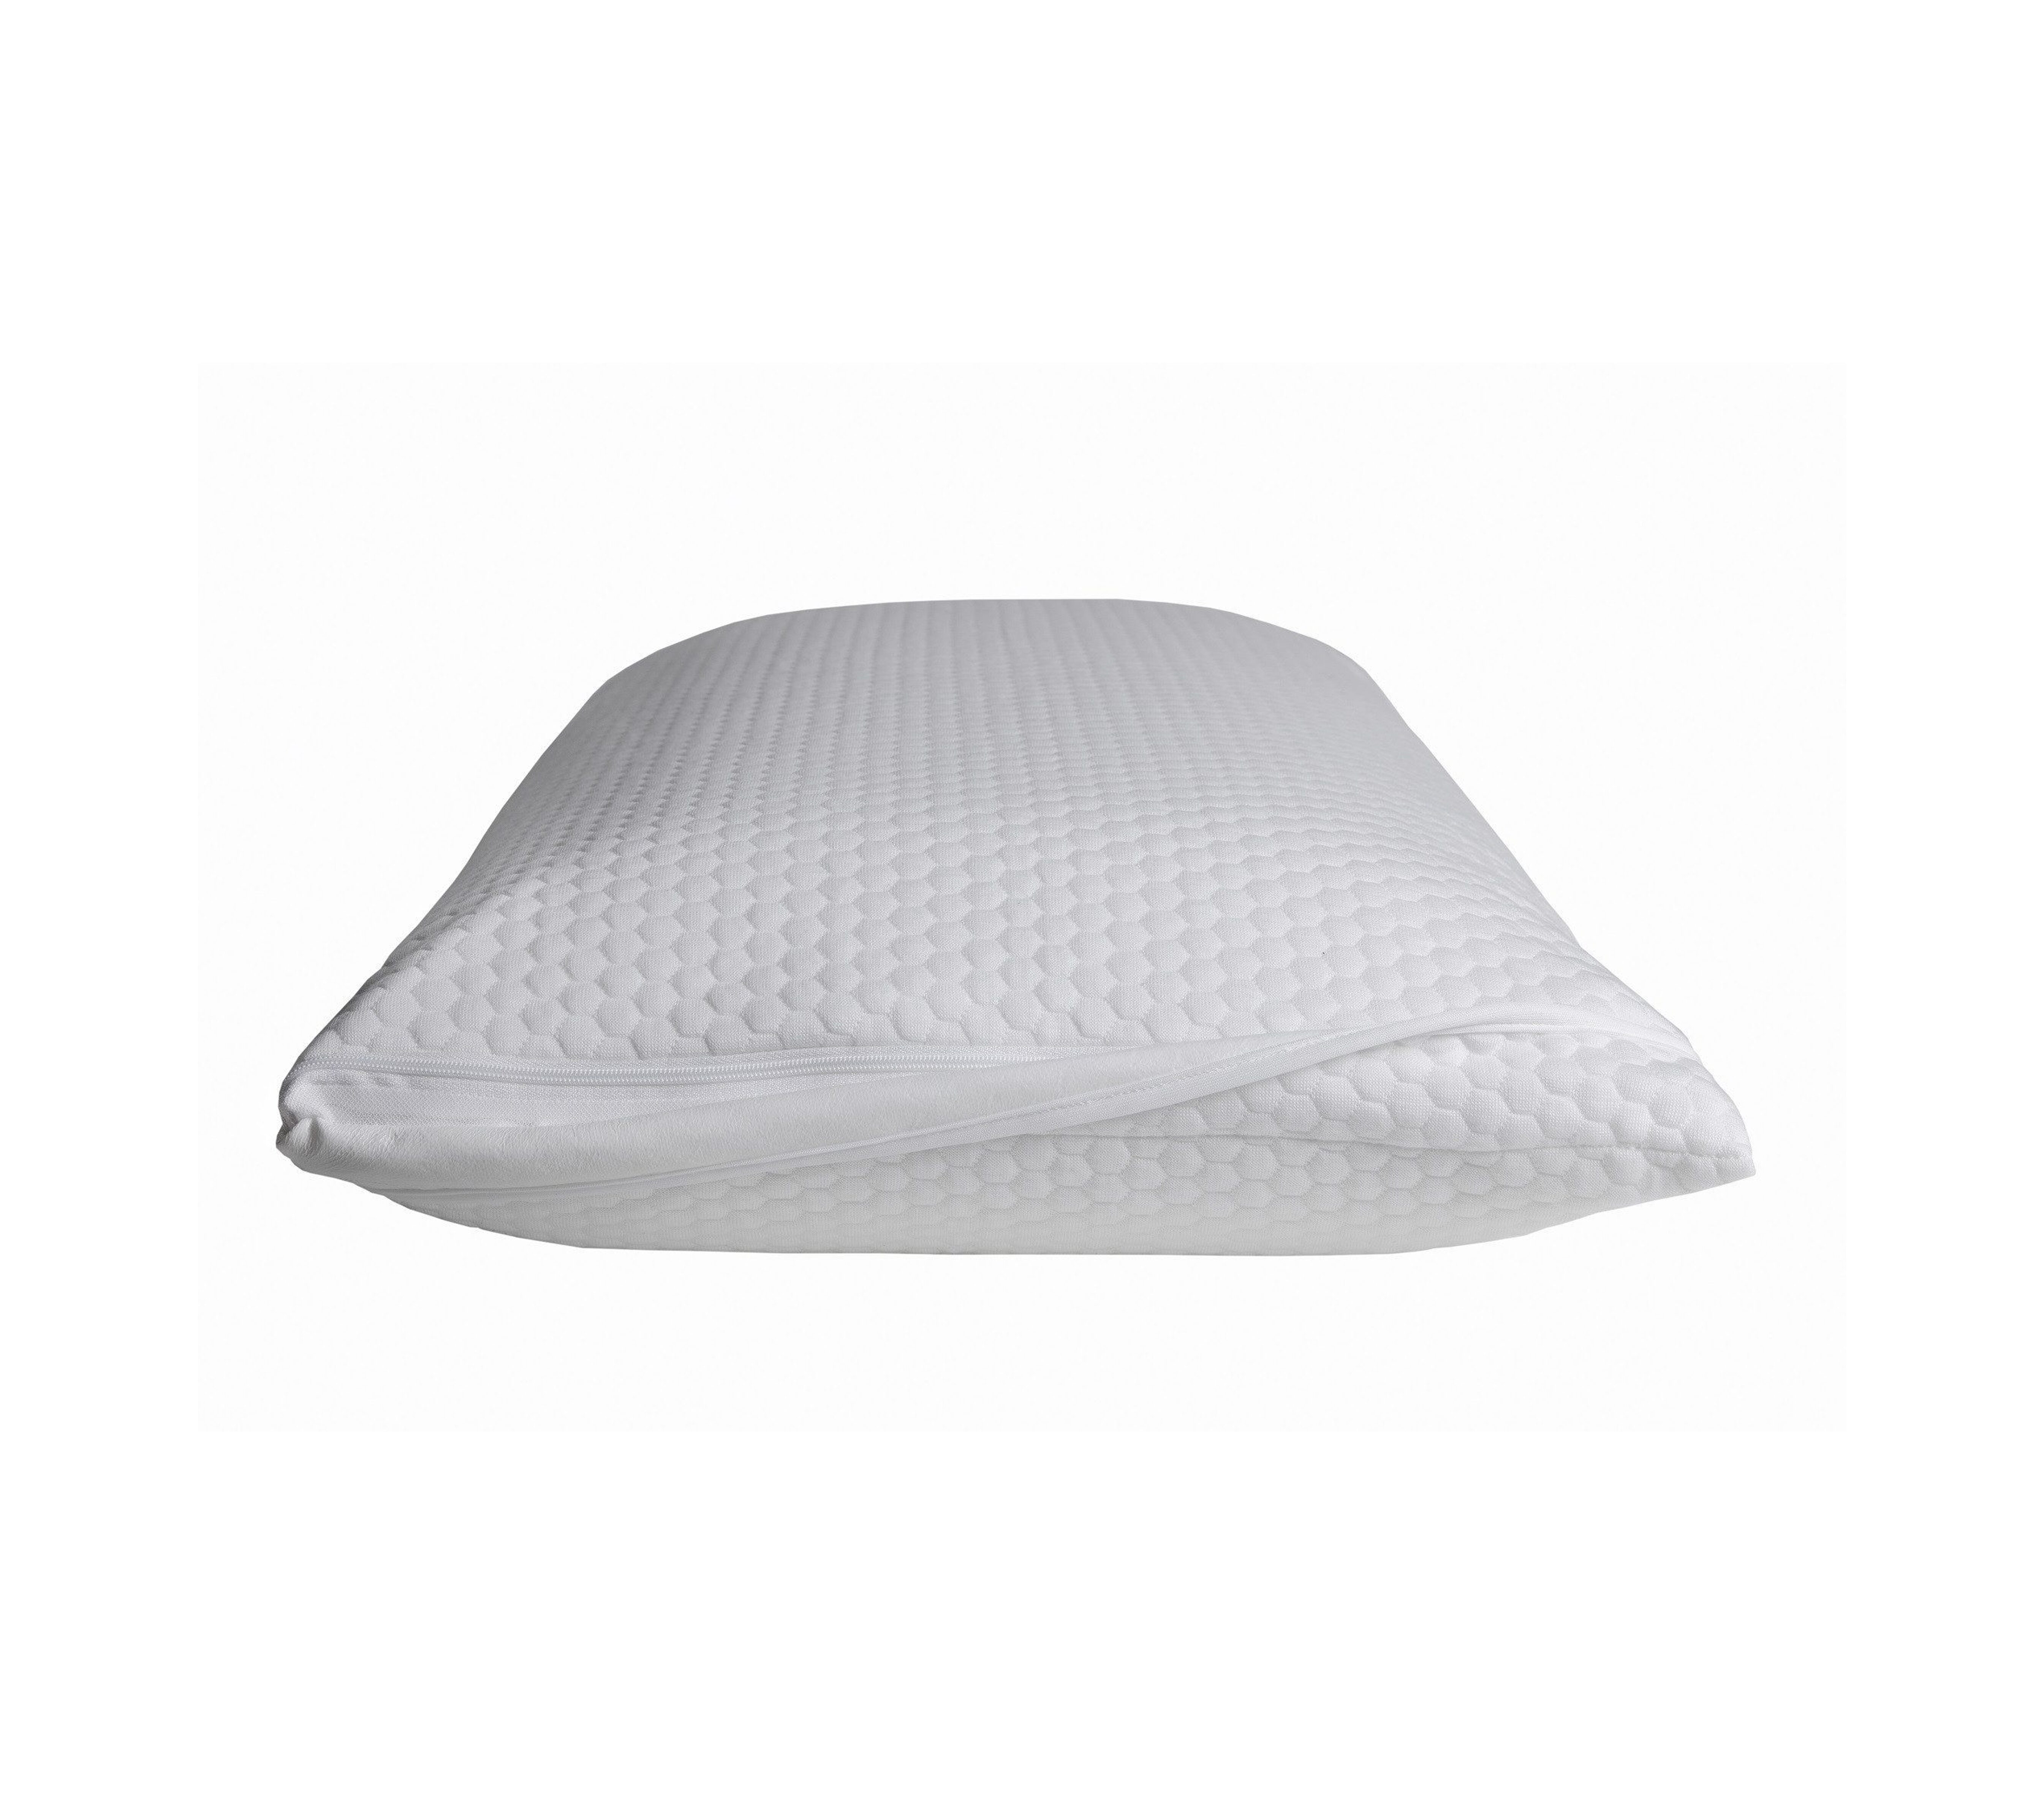 Cosmetic soft pillow